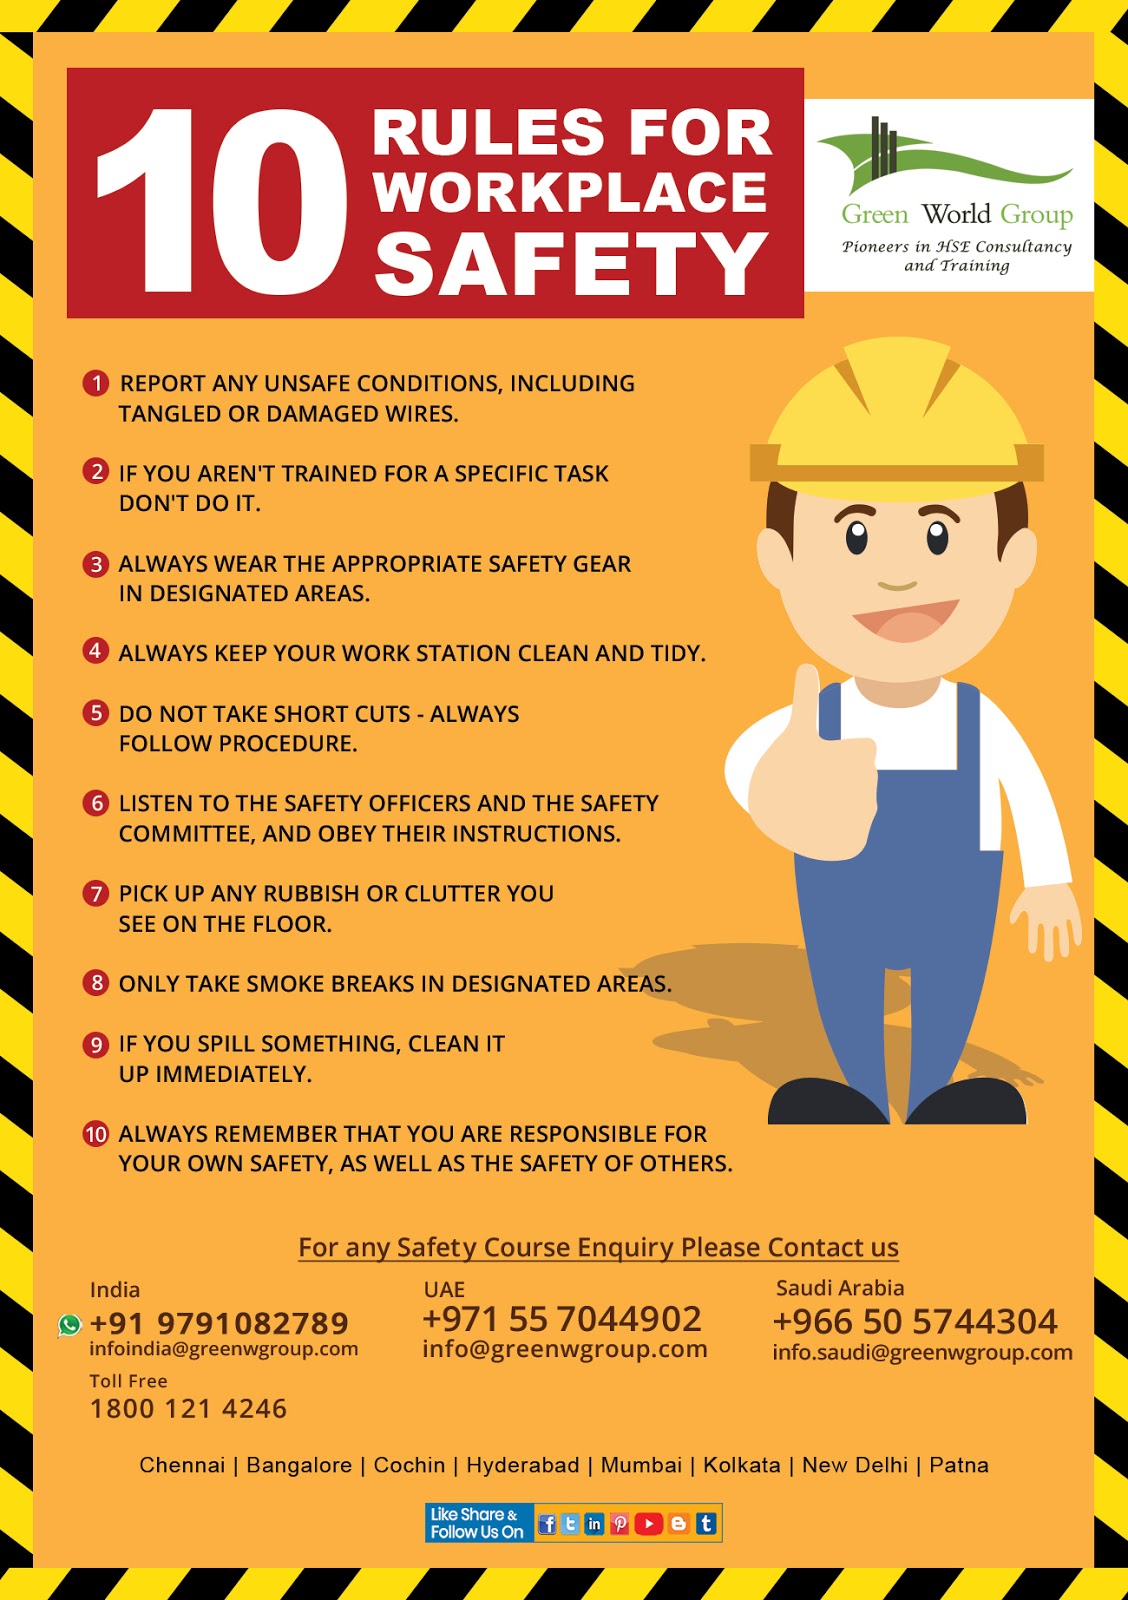 10 Rules for Workplace Safety tips - GWG